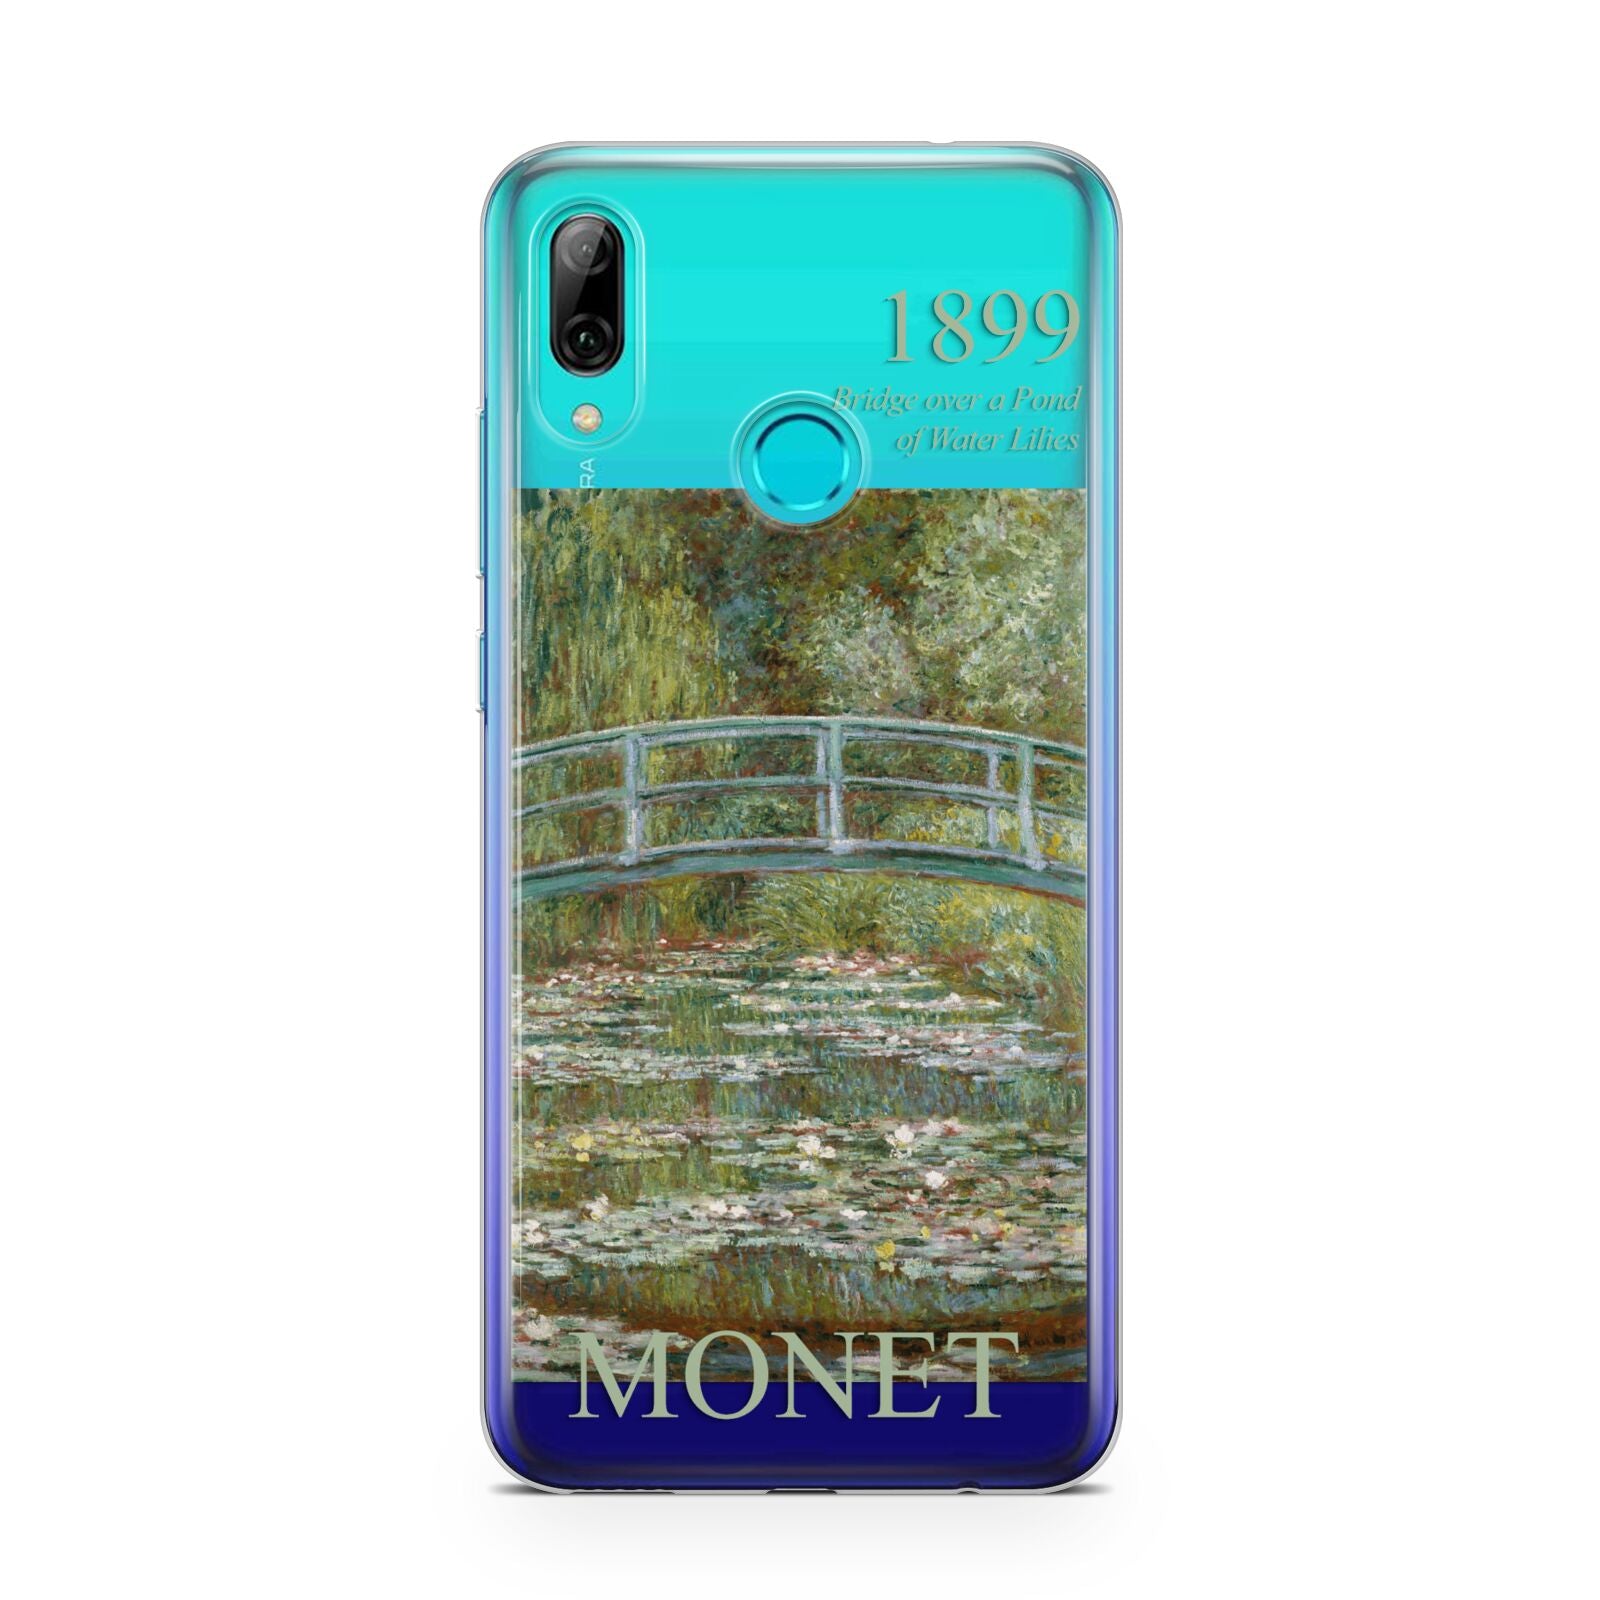 Bridge Over A Pond Of Water Lilies By Monet Huawei P Smart 2019 Case